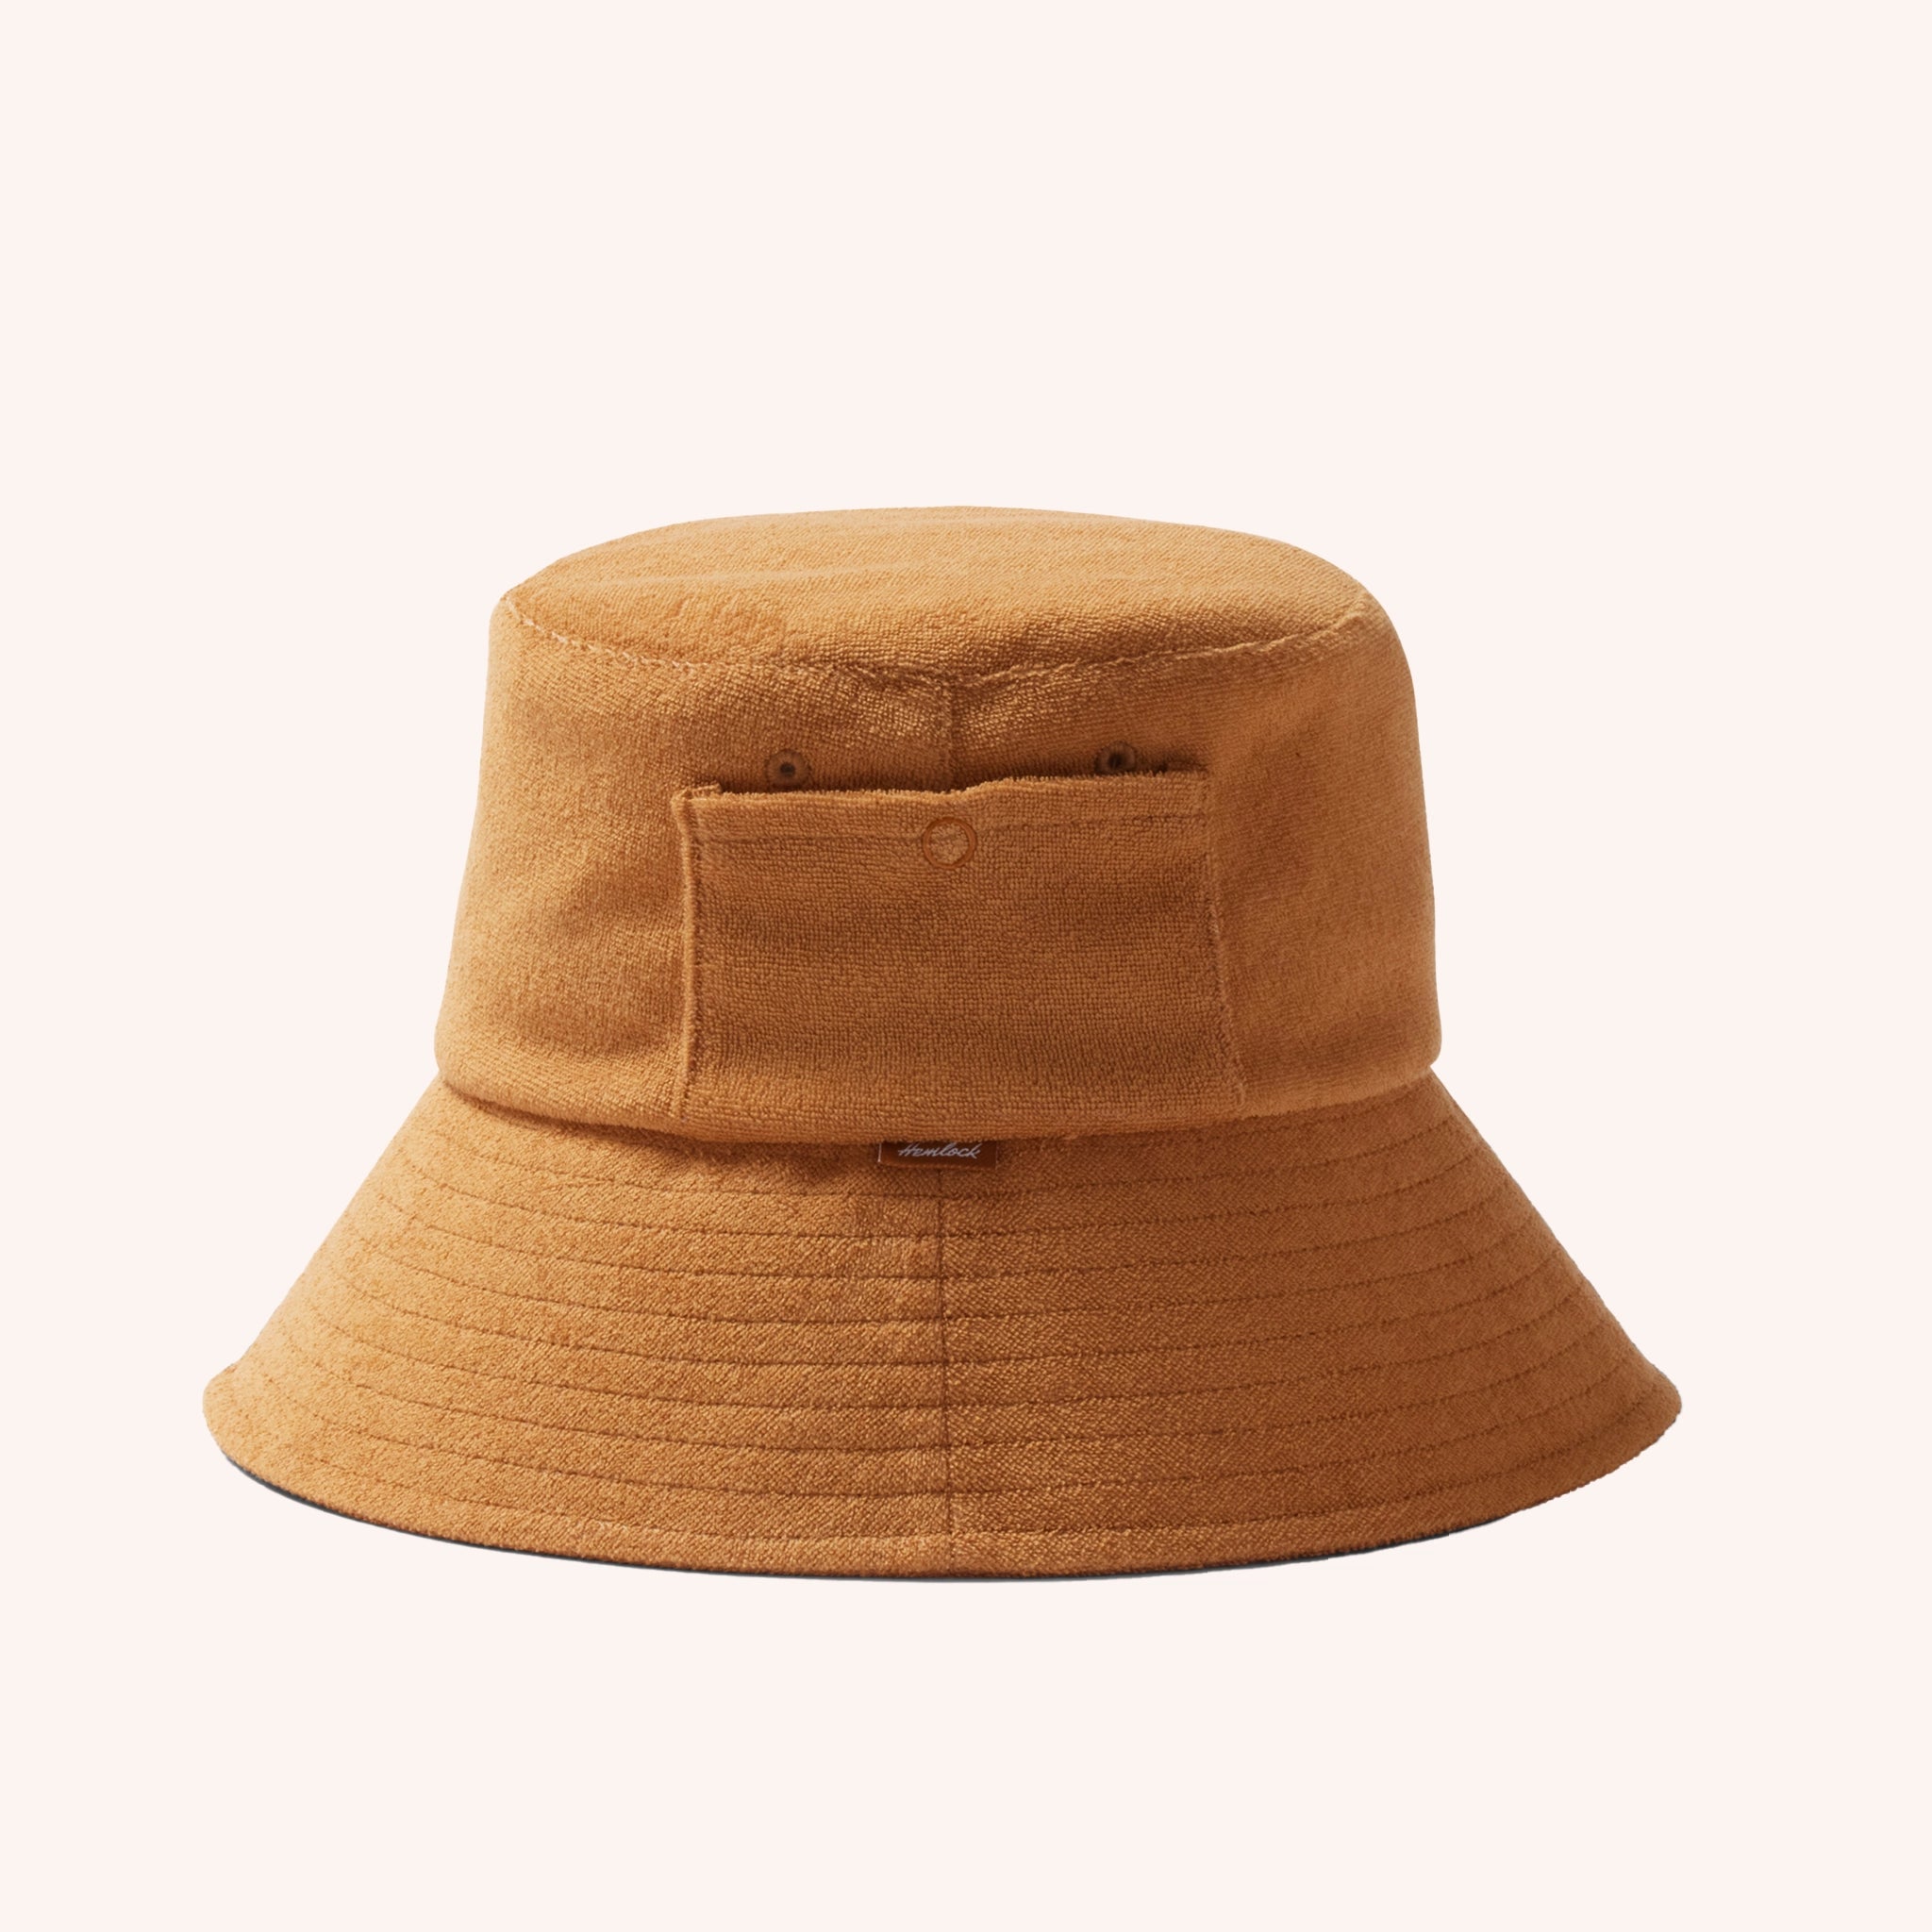 A cotton bucket hat in a dark yellow shade with a ribbed brim and a small side pocket.